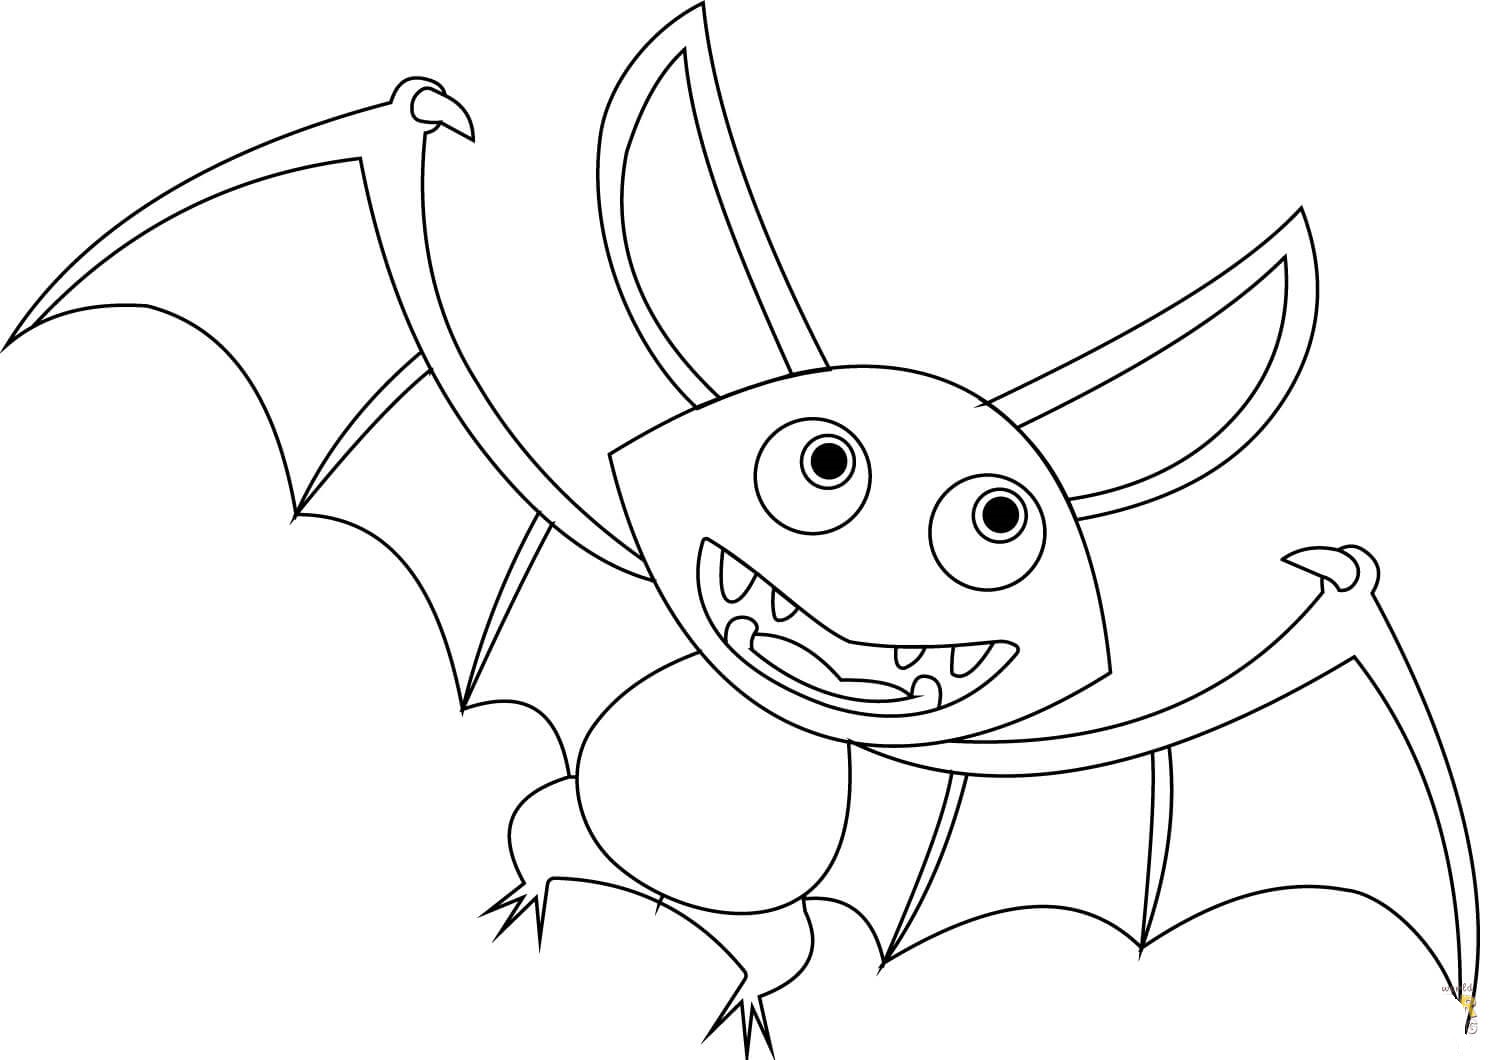 Printable Bat For Us Coloring Page